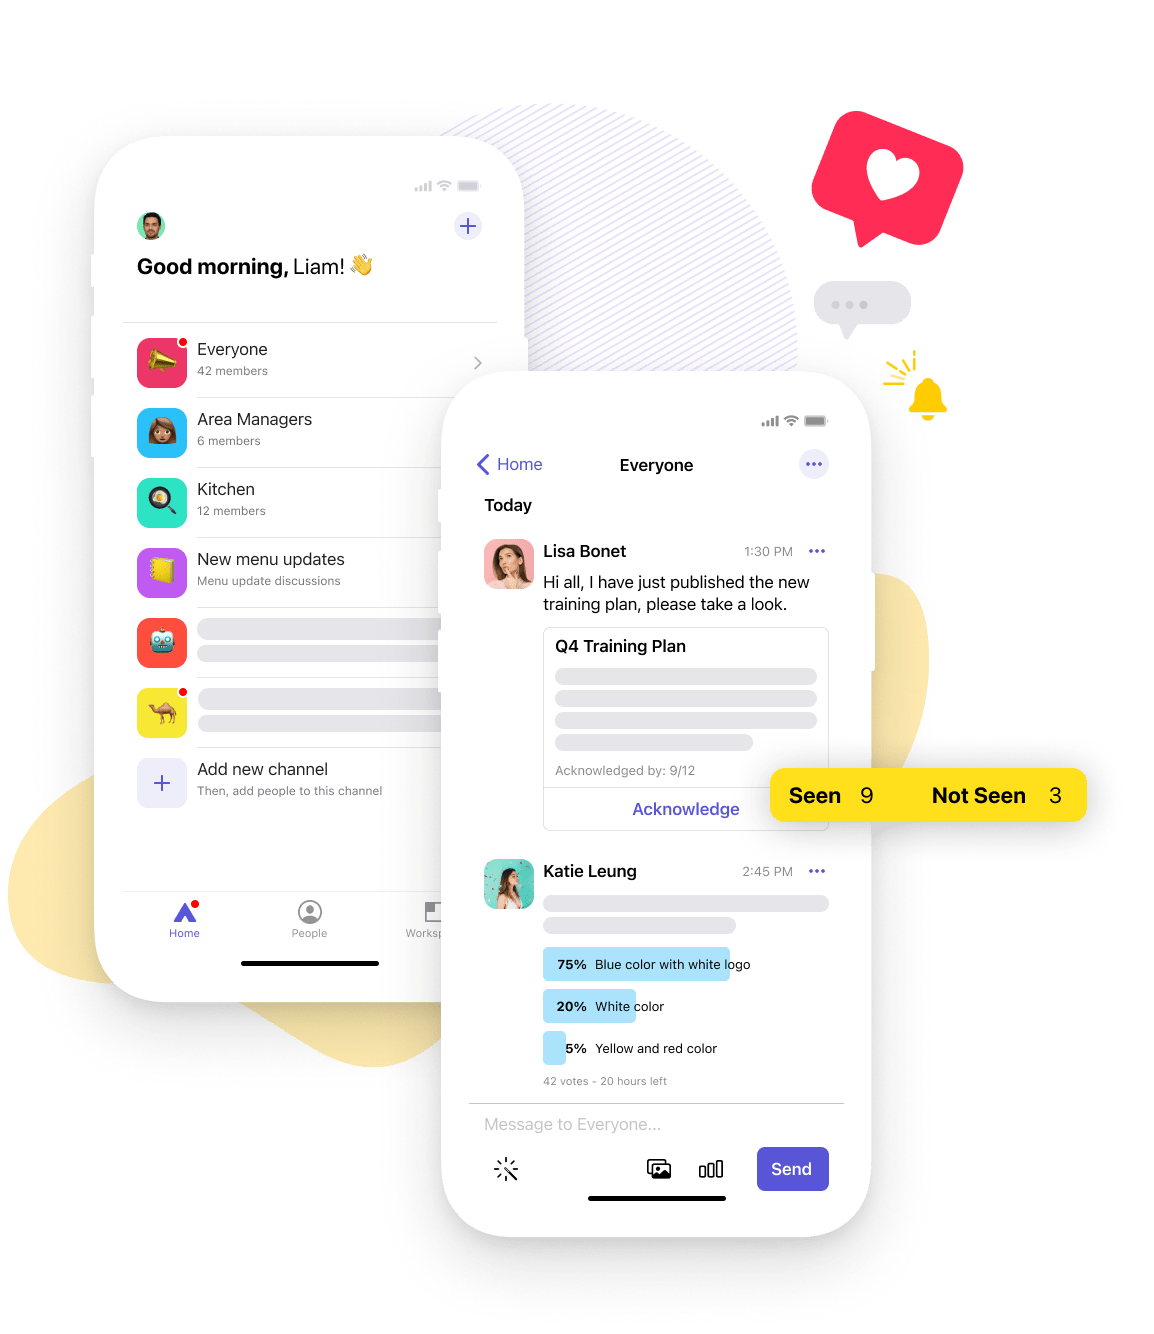 The team messaging app that keeps everyone in sync